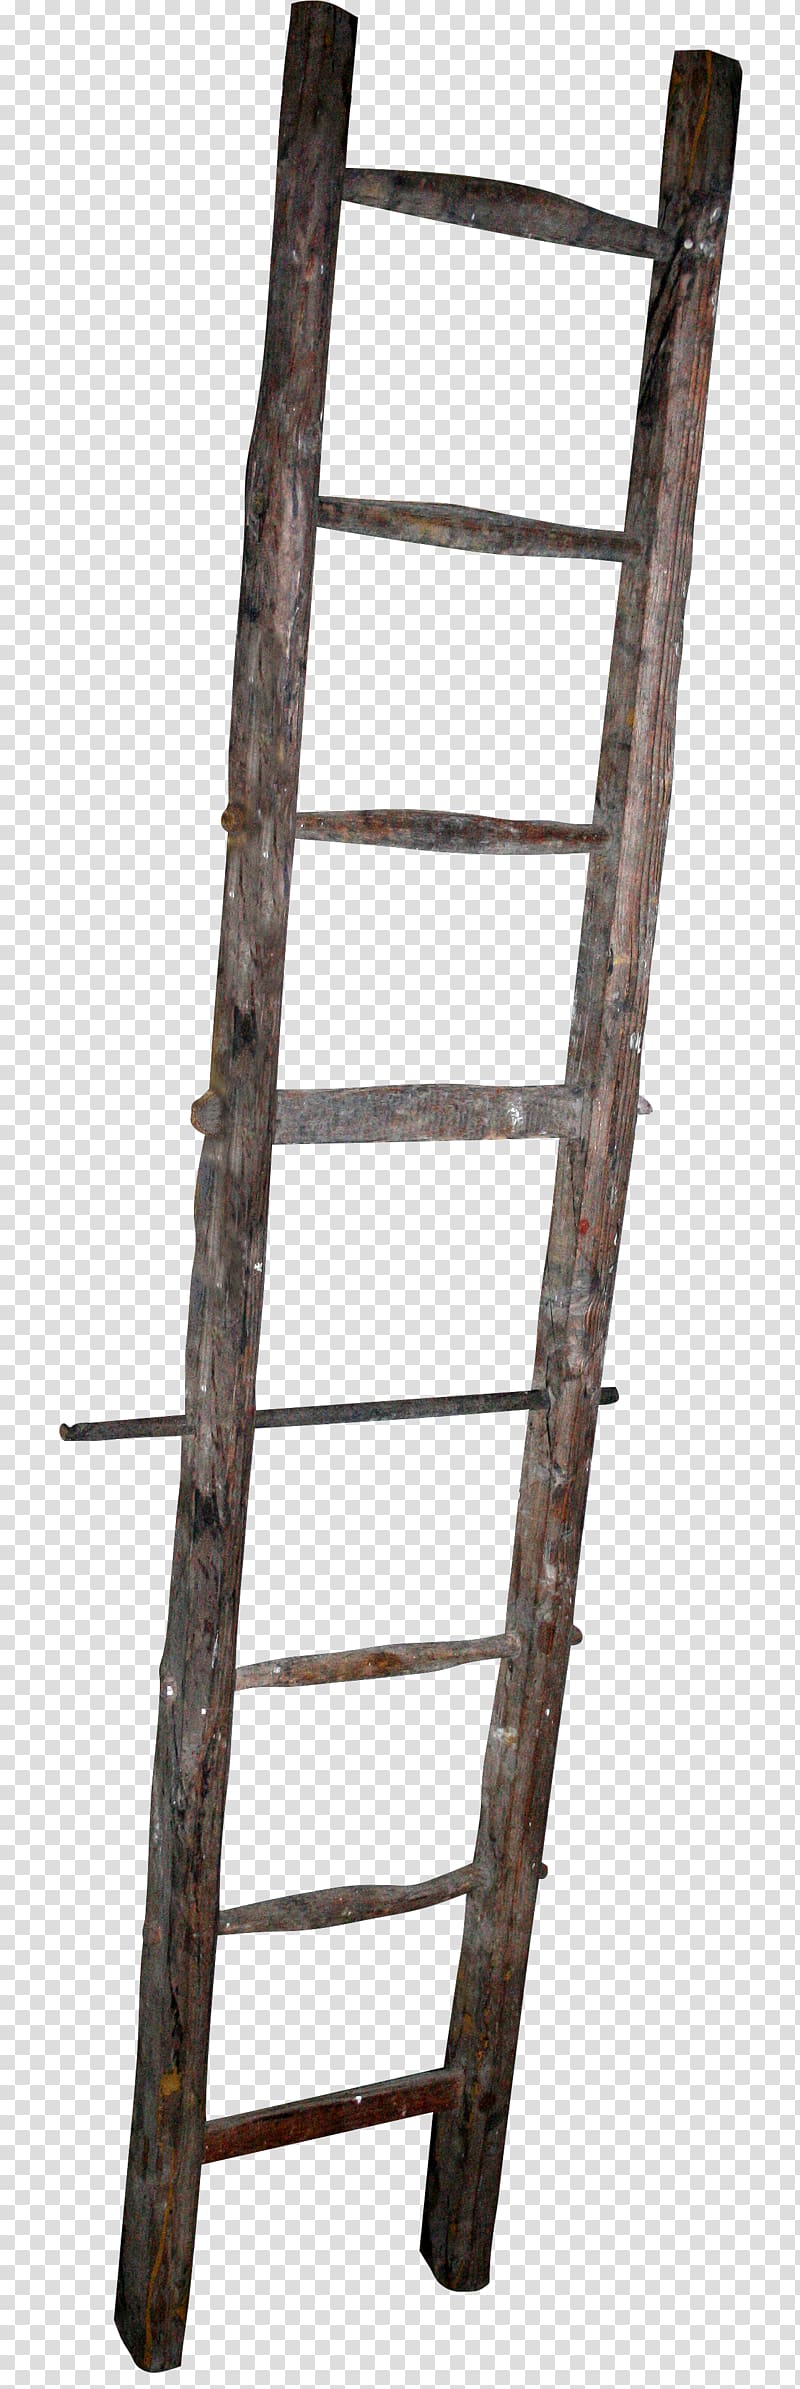 Wood Ladder Stairs, ladder transparent background PNG clipart